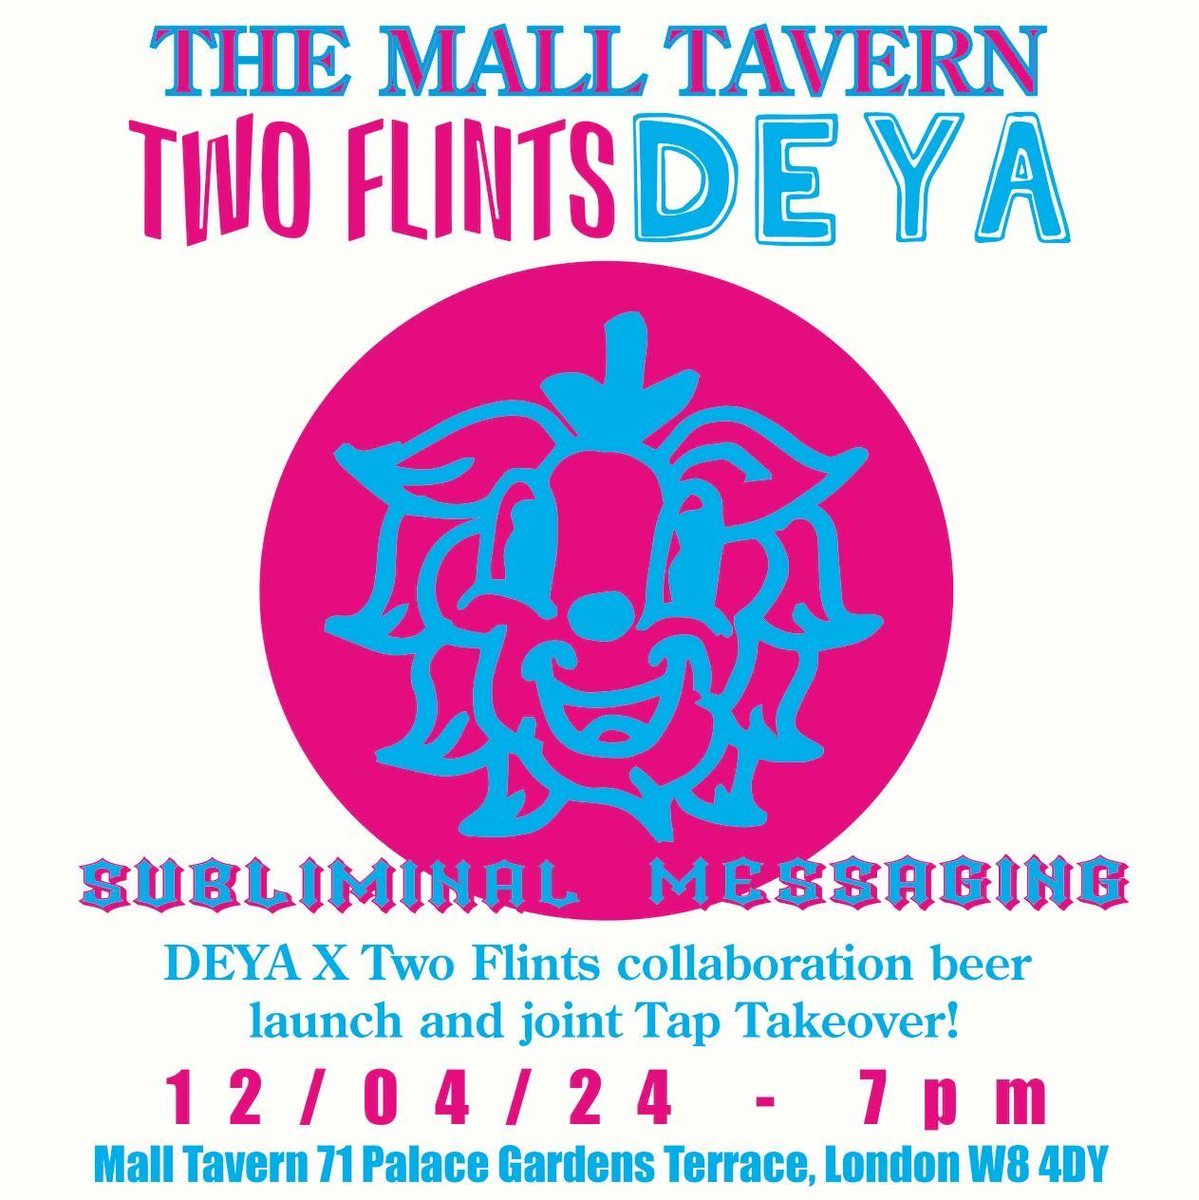 ** FIRST UK POUR - SUBLIMINAL MESSAGING ** We are hosting a new beer launch tonight with TWO FLINTS and DEYA. They have collaborated on a 5% Pale Ale called Subliminal Messaging; it's a cracker! Come on down and meet the guys that made it. @deyabrewery @twoflintsbrewery